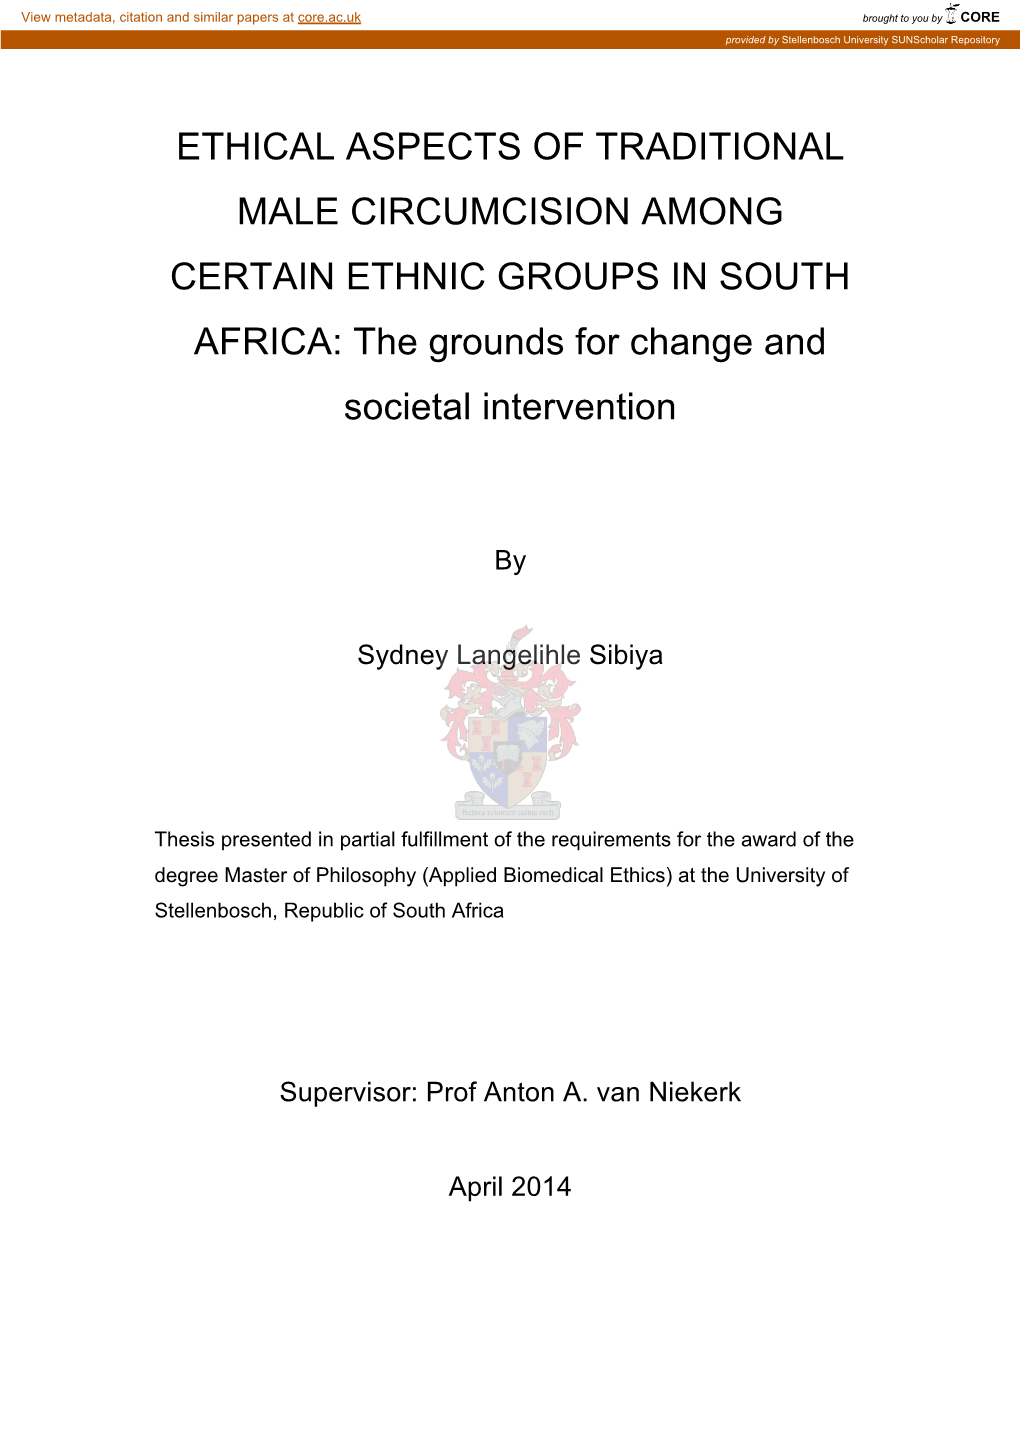 ETHICAL ASPECTS of TRADITIONAL MALE CIRCUMCISION AMONG CERTAIN ETHNIC GROUPS in SOUTH AFRICA: the Grounds for Change and Societal Intervention